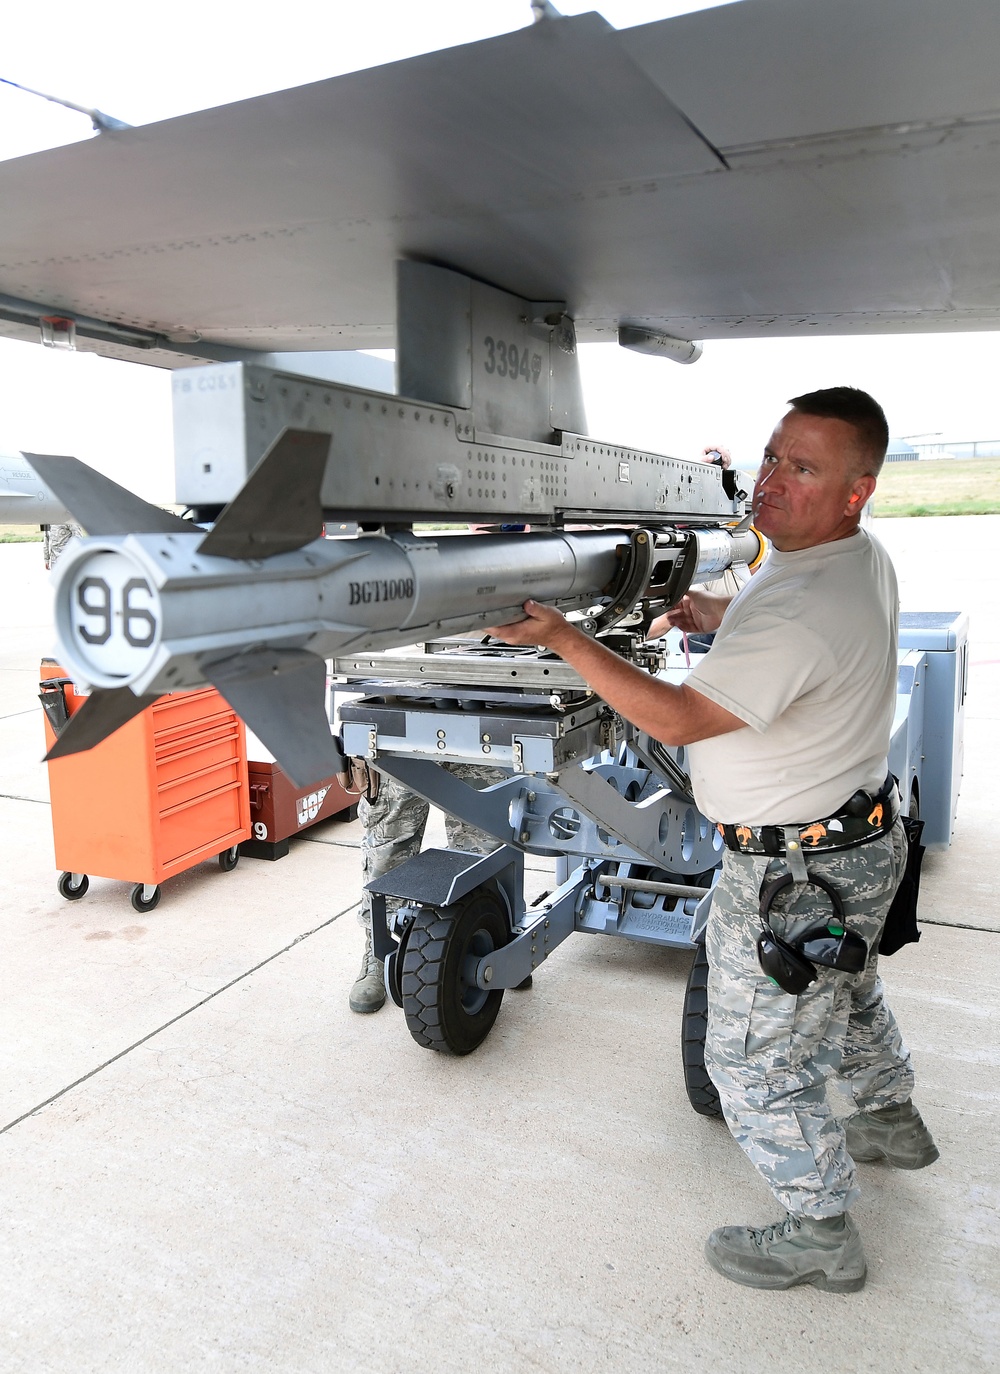 Sound of freedom: If it’s in the air, maintainers put it there